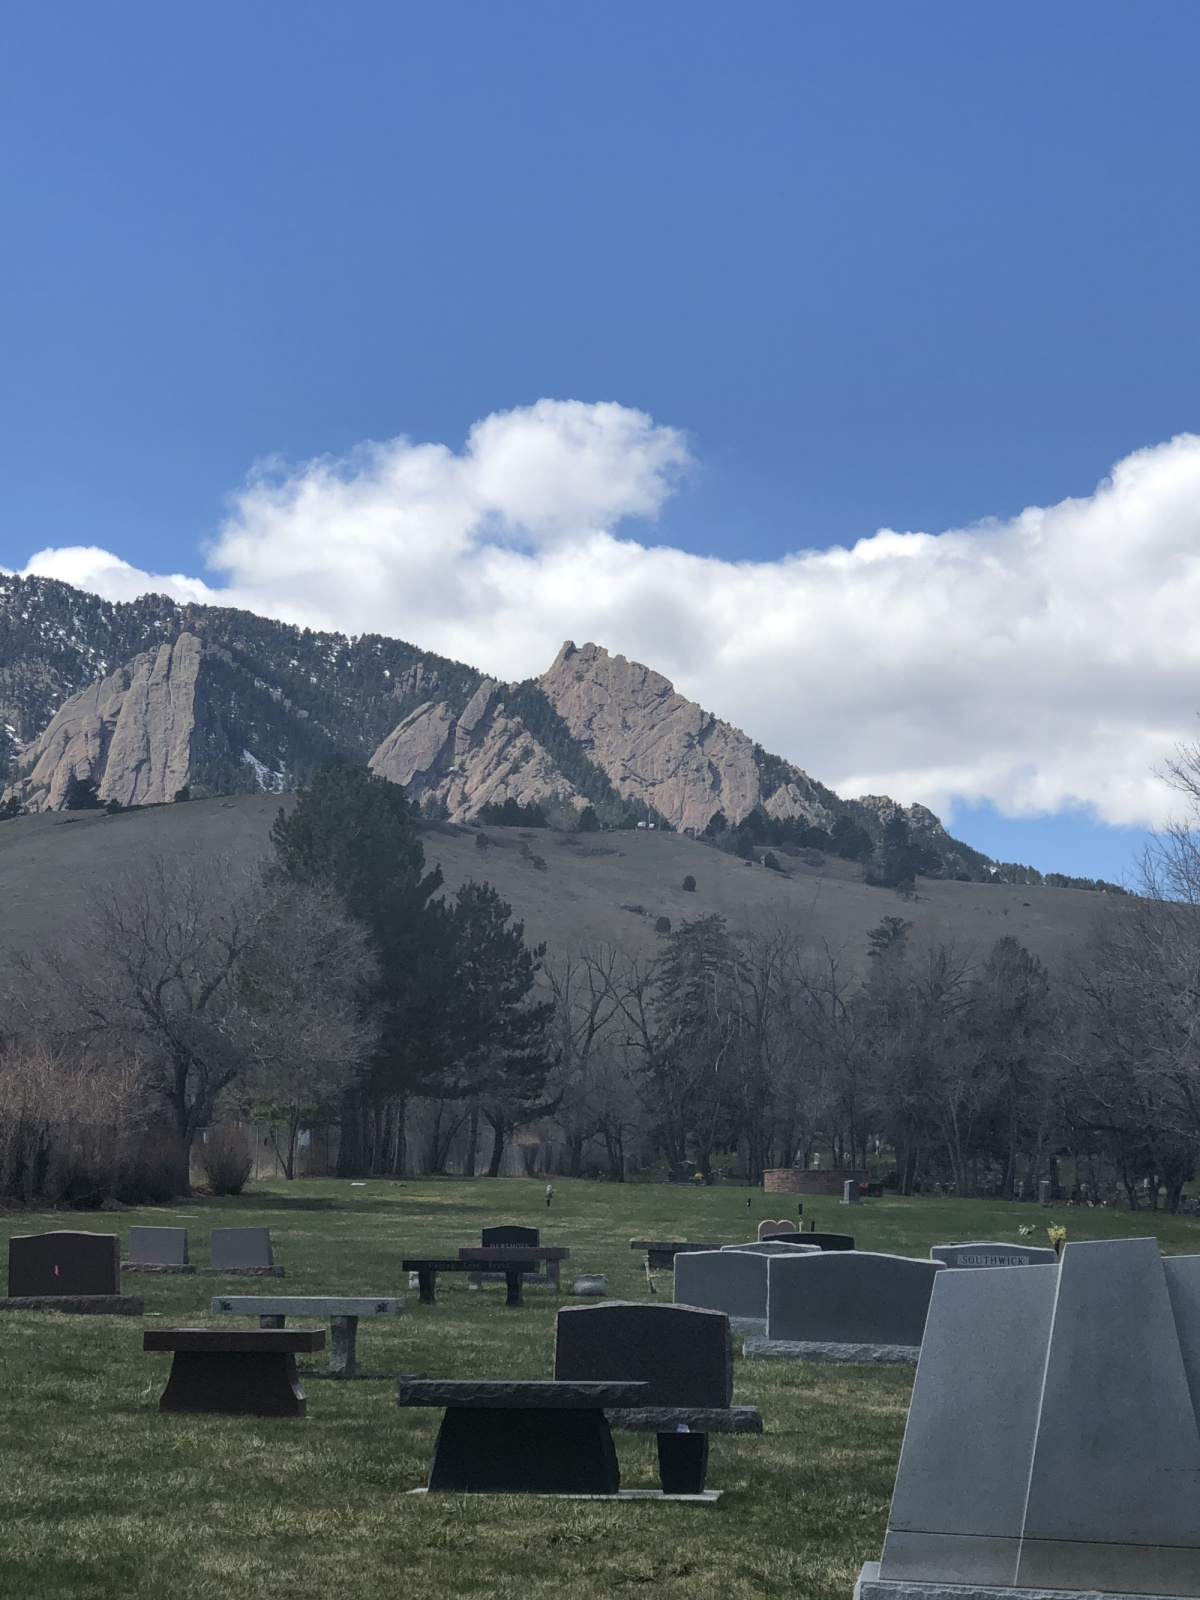 Such a beautiful spot. I hope some of you will, someday , be able to visit her here and enjoy our flatirons which are iconic boulder sights.
